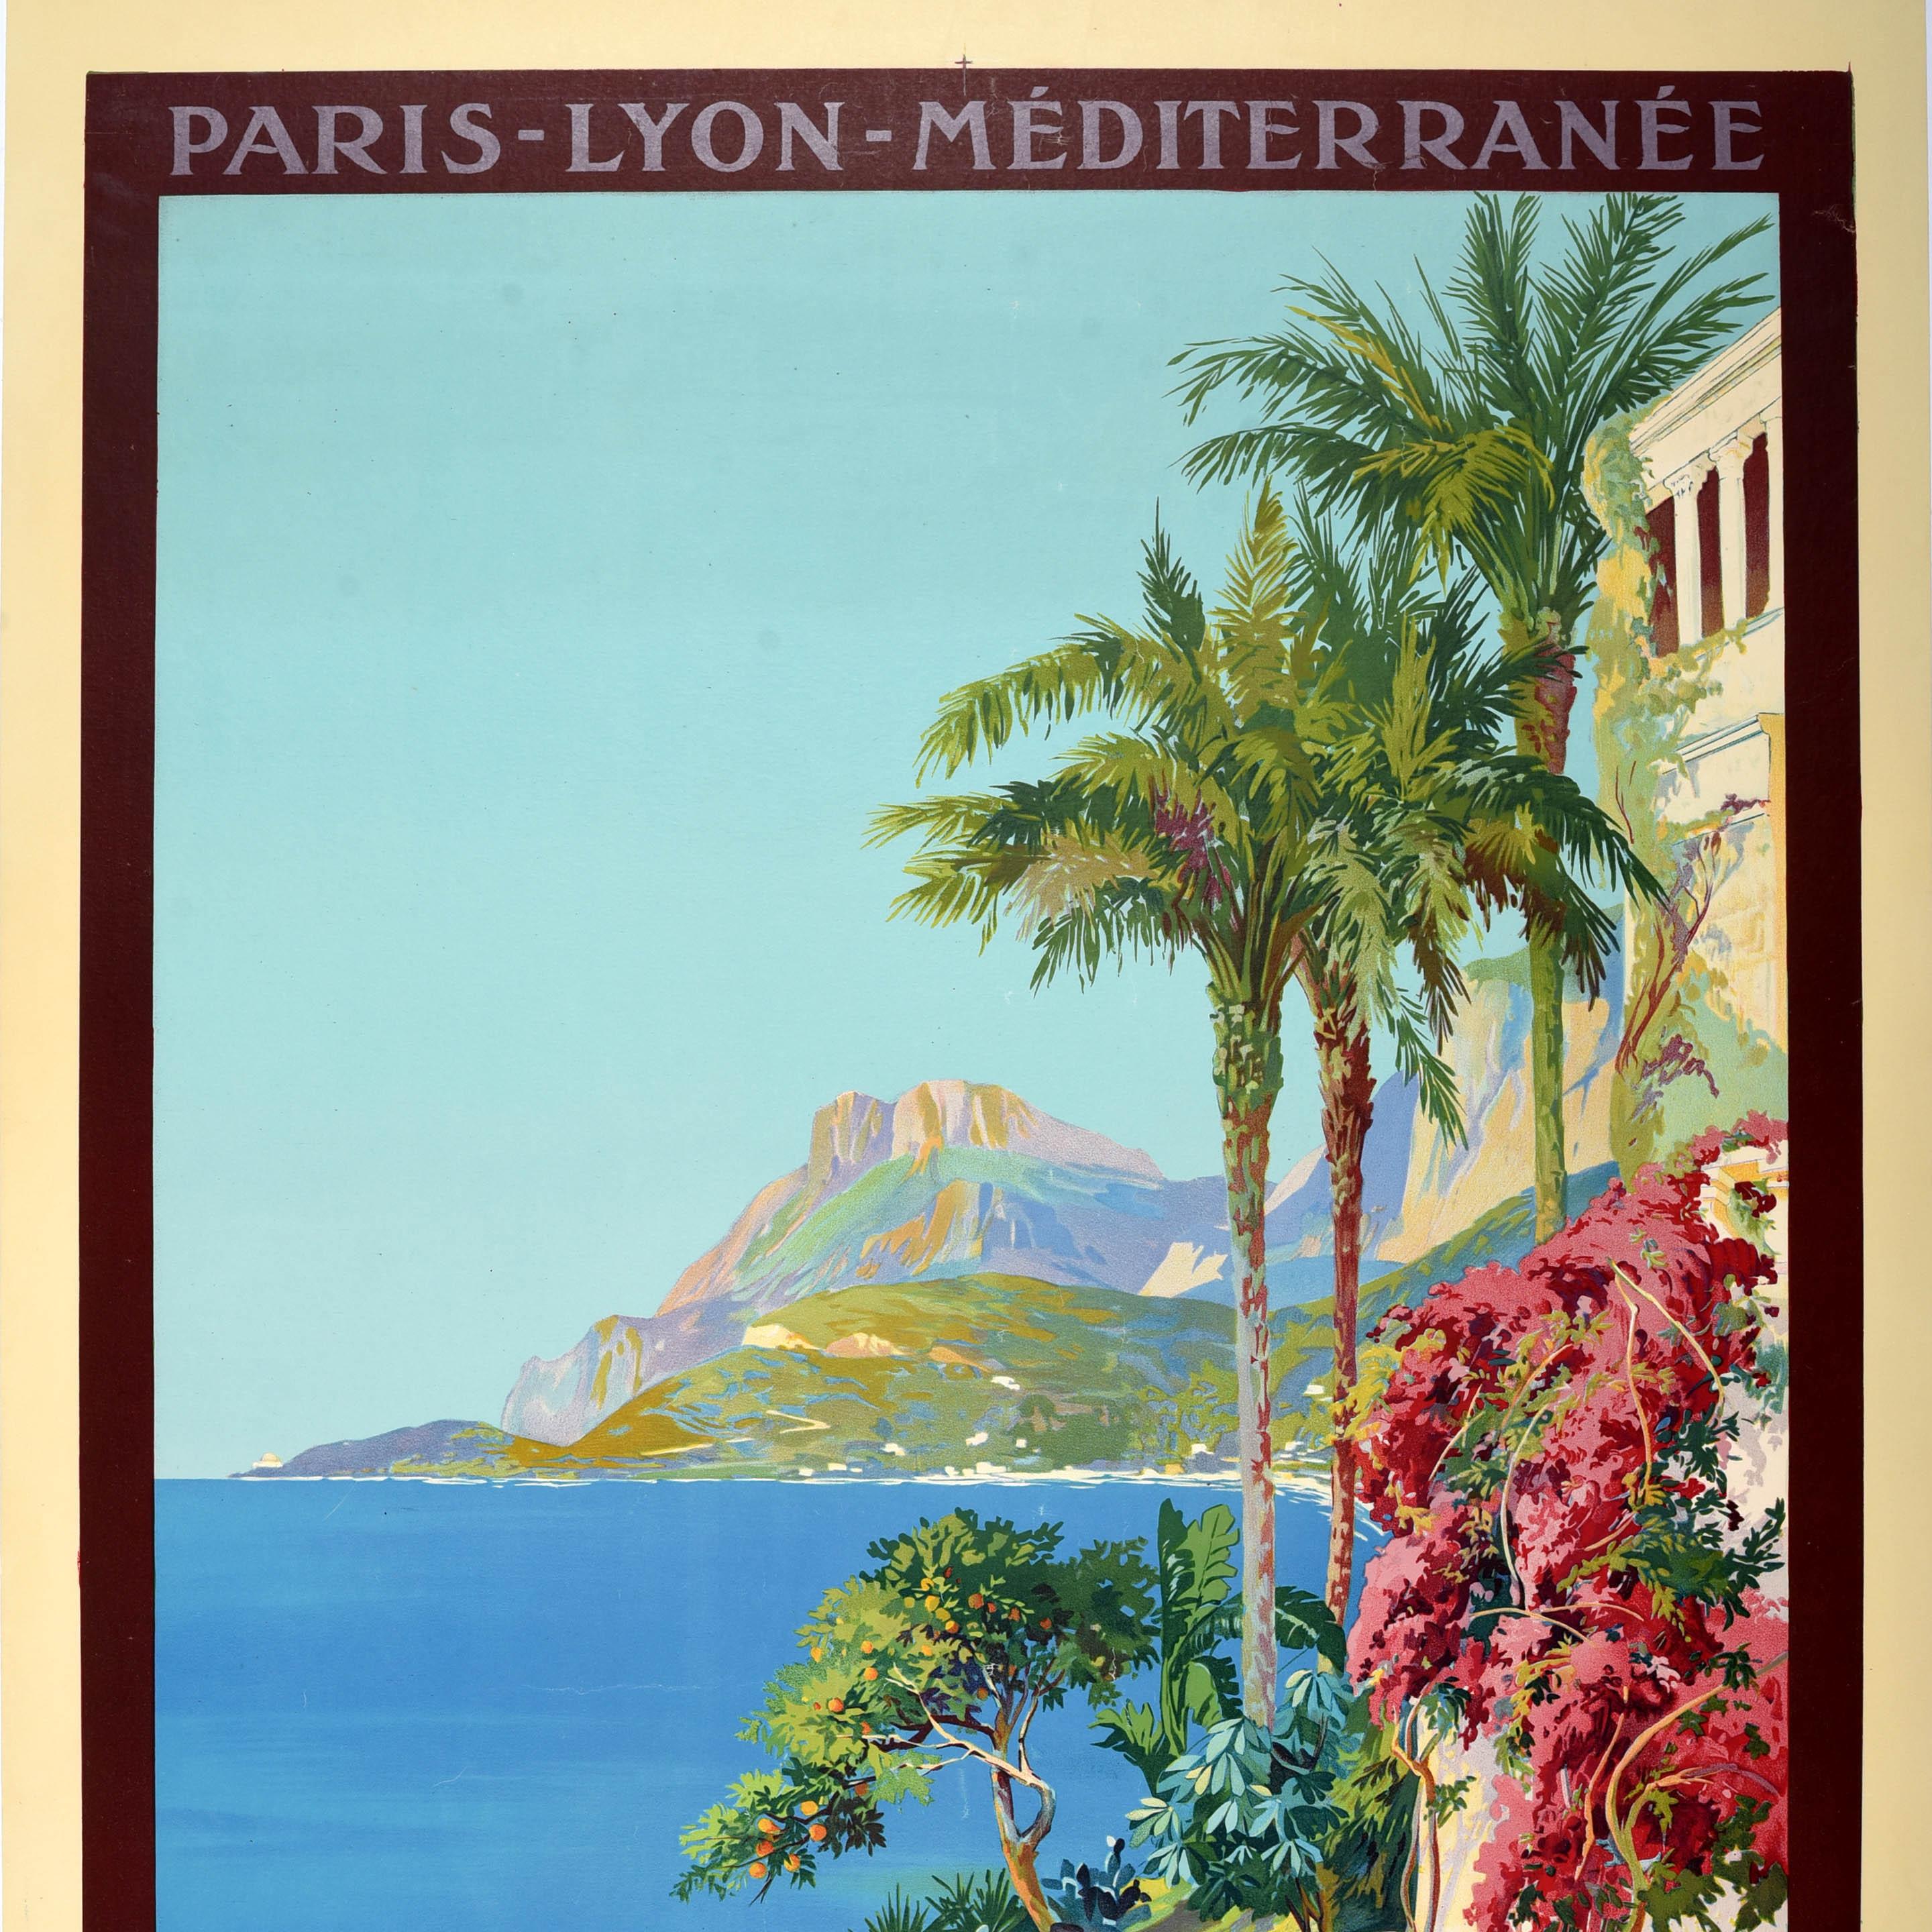 Original Antique Travel Poster Cote D'Azur Cap Martin French Riviera PLM Railway In Good Condition For Sale In London, GB